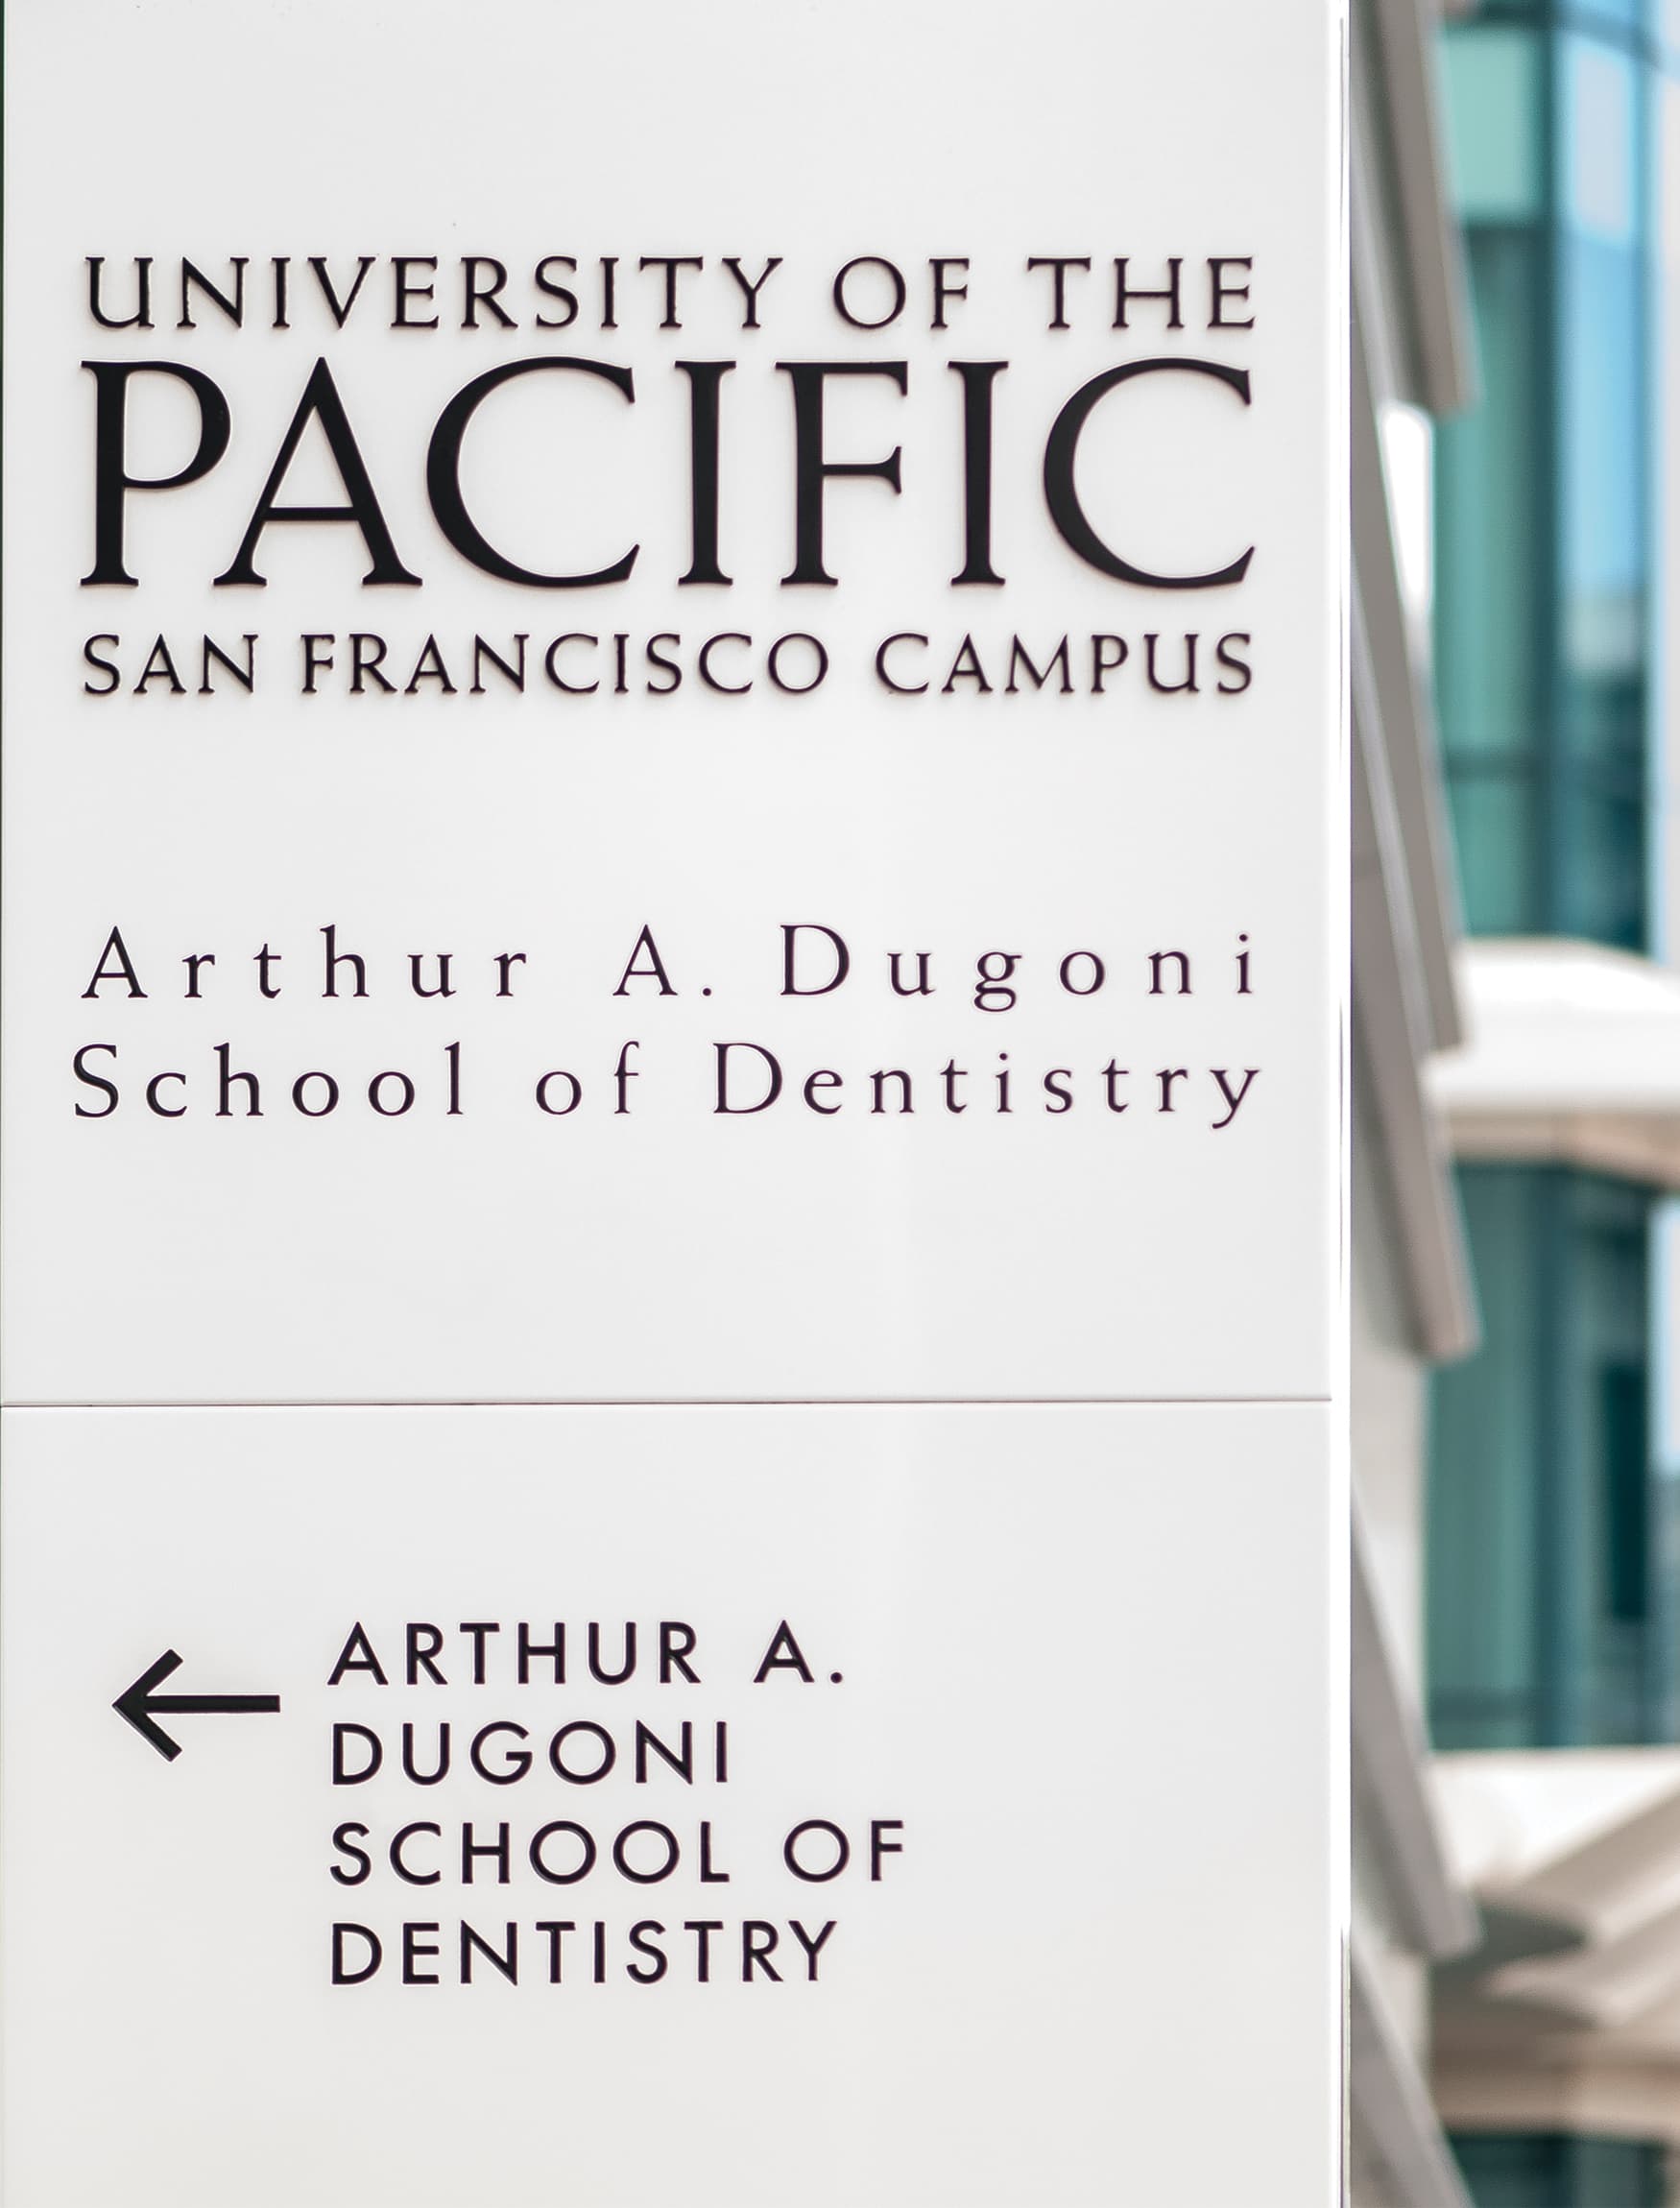 University of the Pacific, Education Design and Healthcare Design in San Francisco, California. Project Identity totem and pedestrian directional wayfinding.